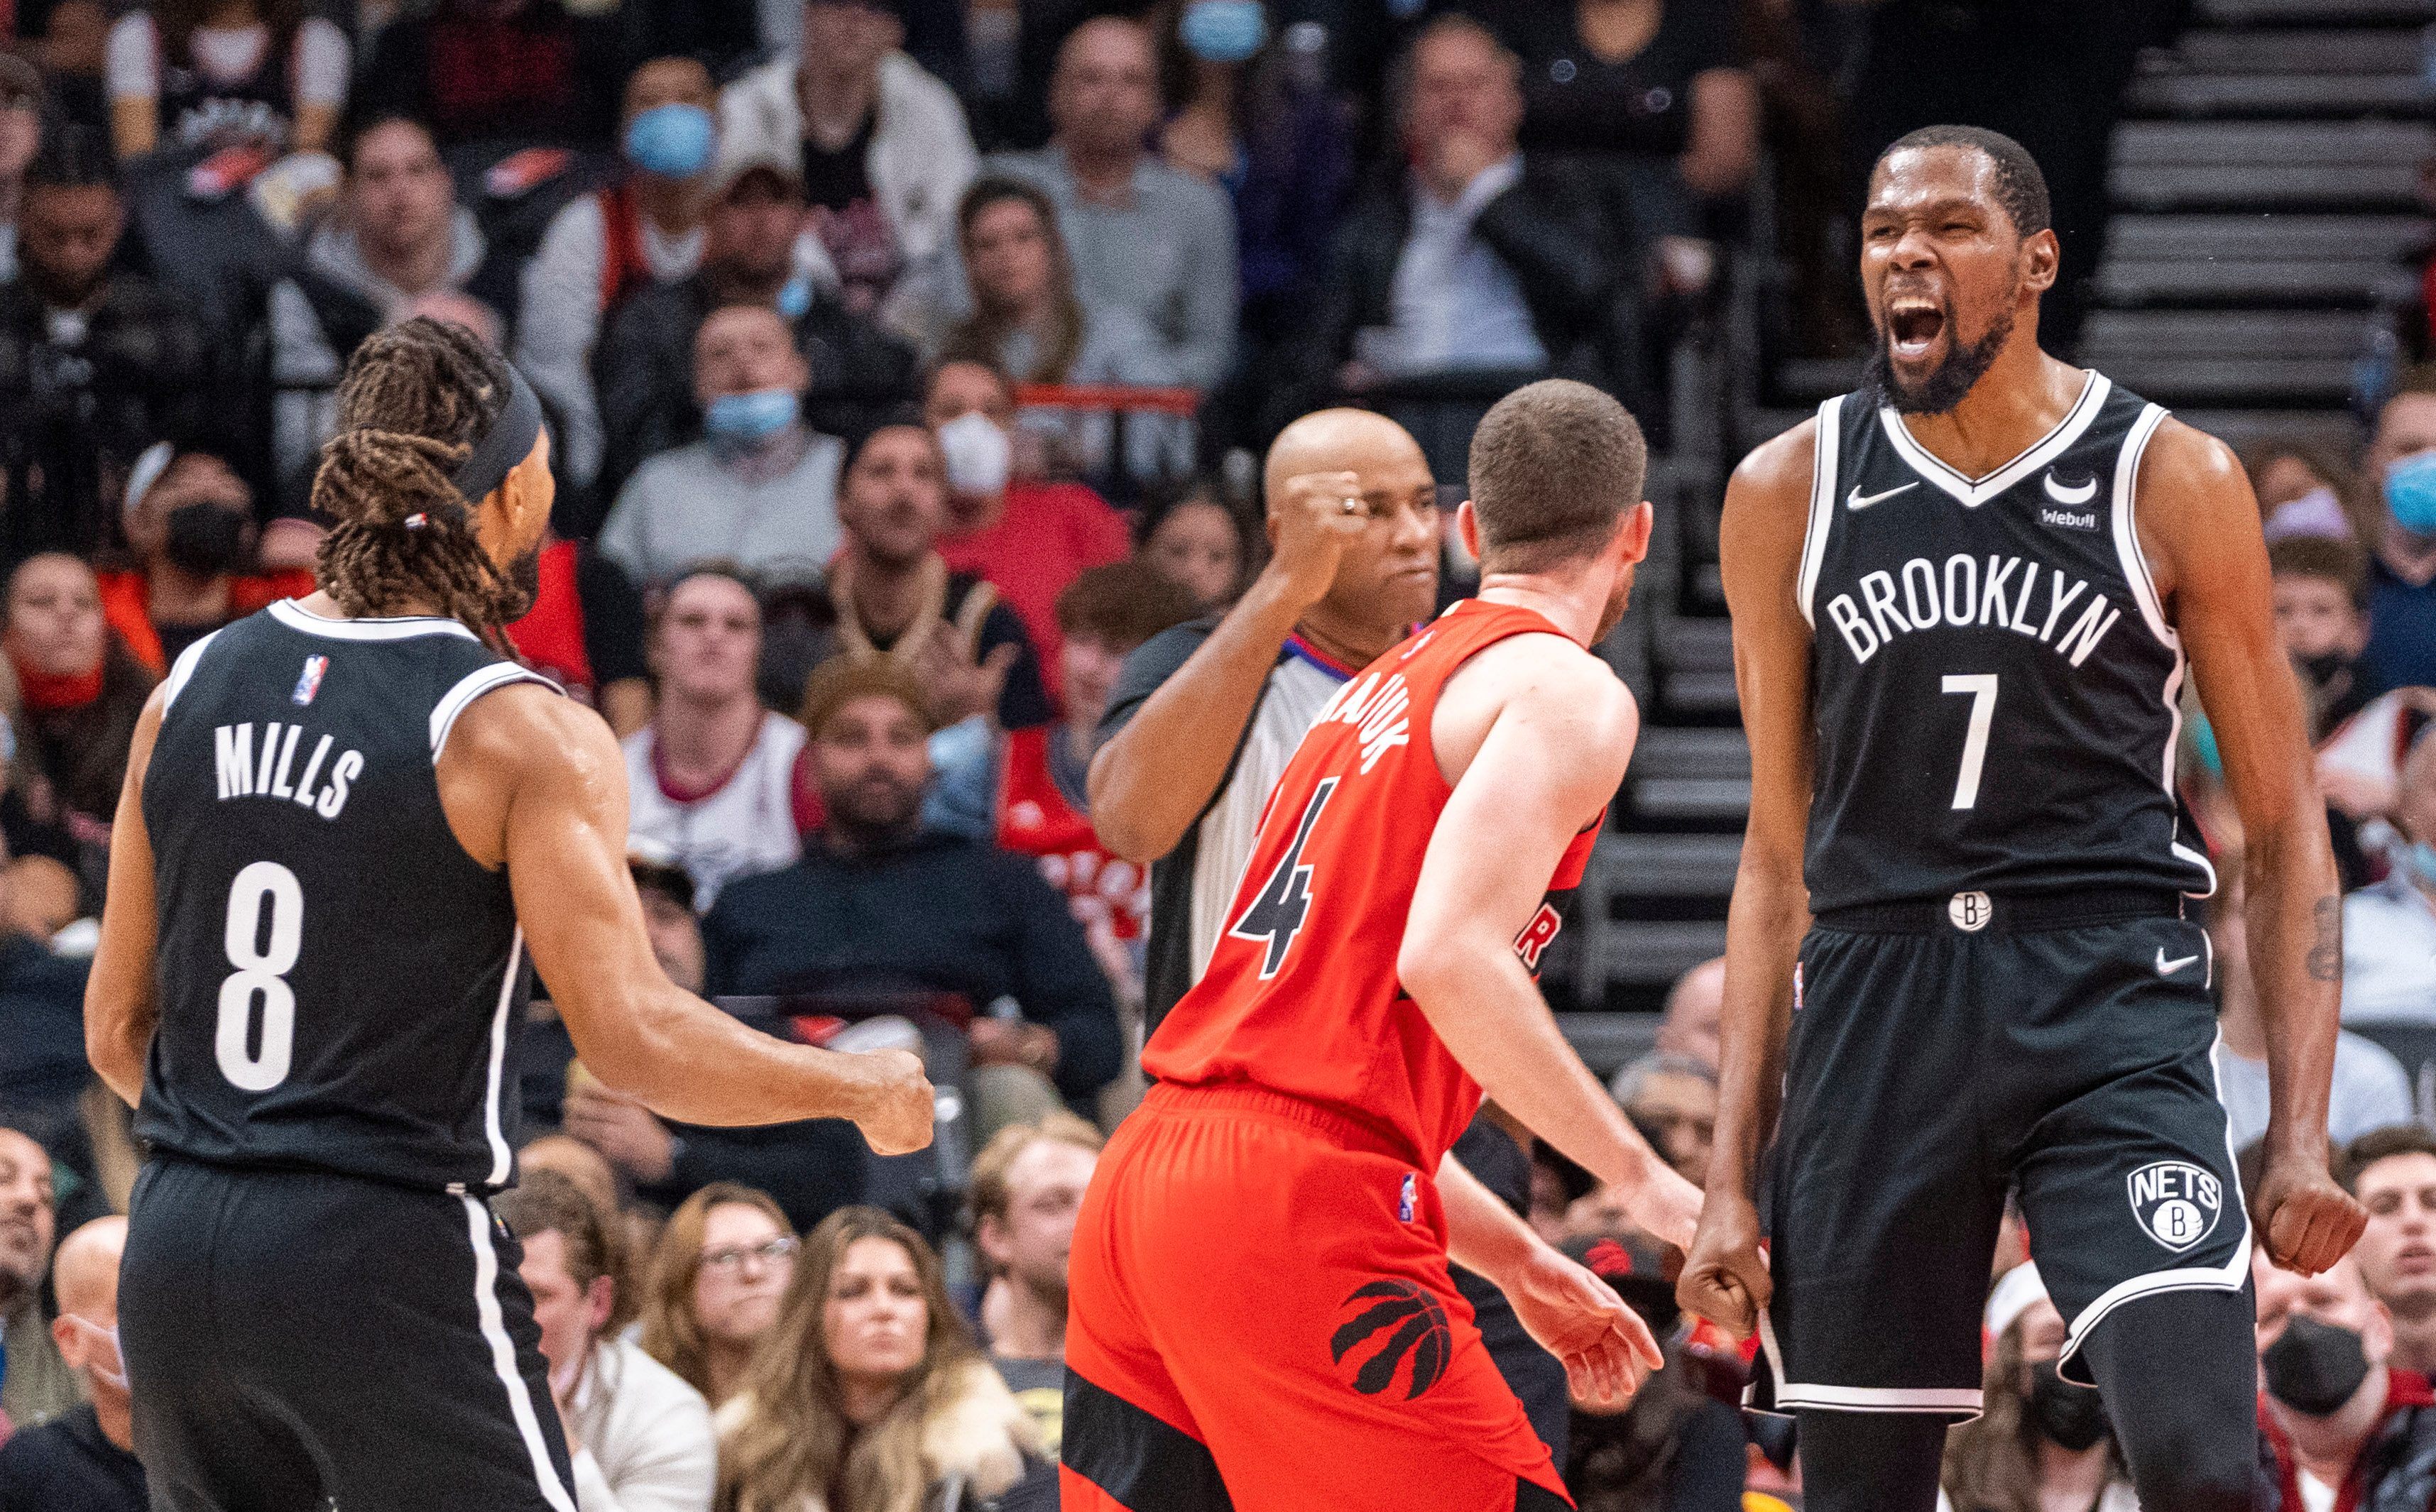 Durant leads Nets over Raptors for 5th straight win